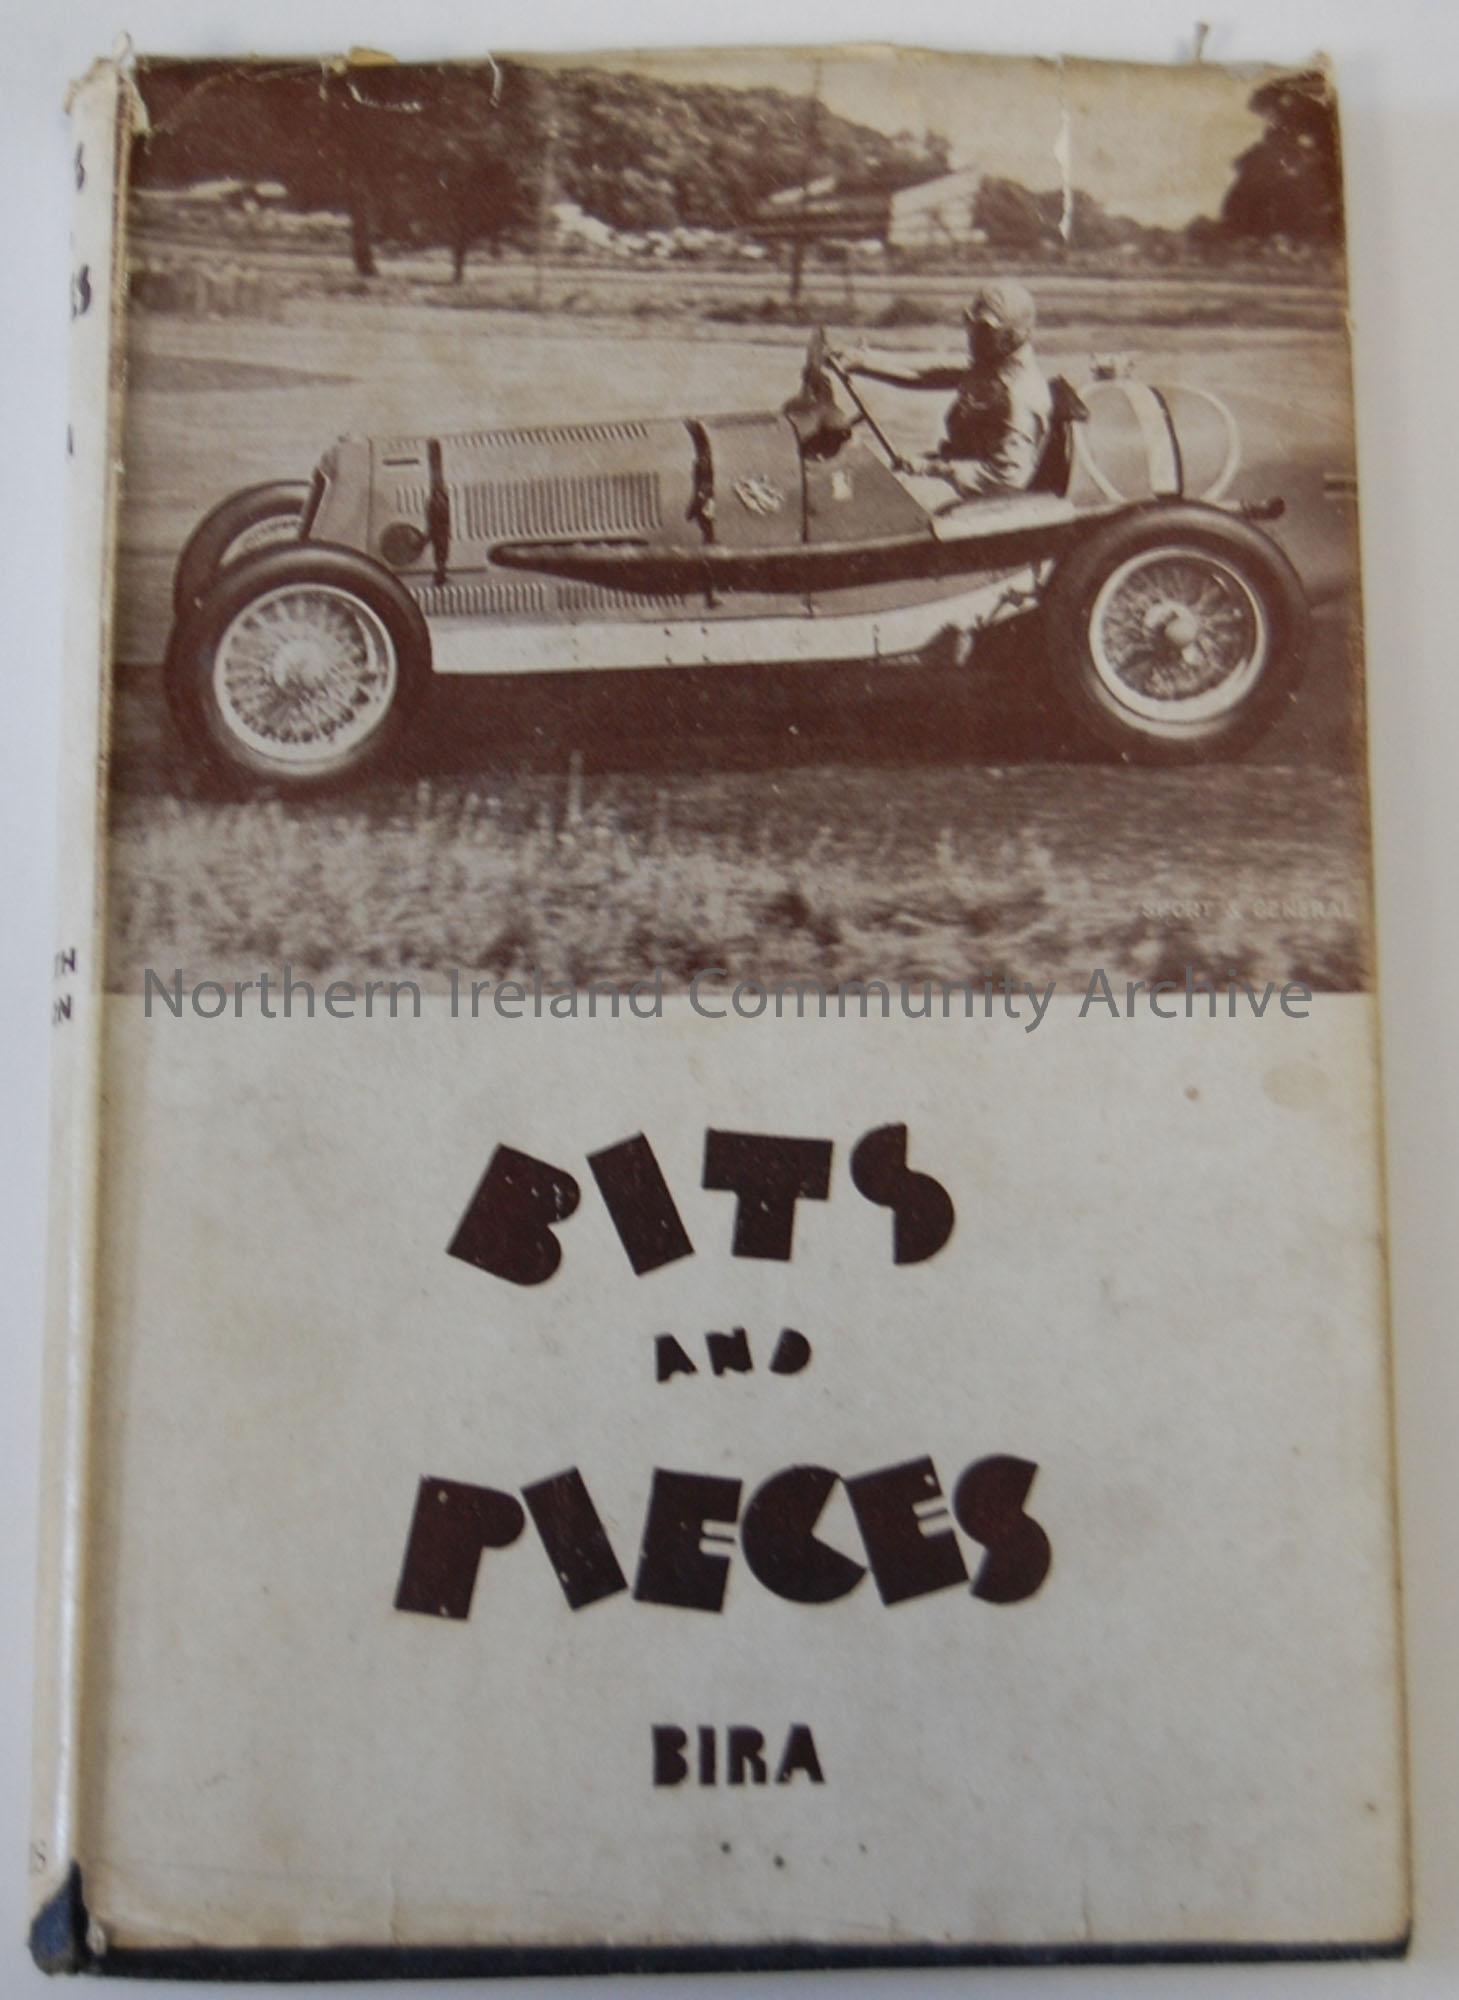 Bits and Pieces, Motor Racing Recollections of ‘B. BIRA’ by Prince Birabongse of thailand